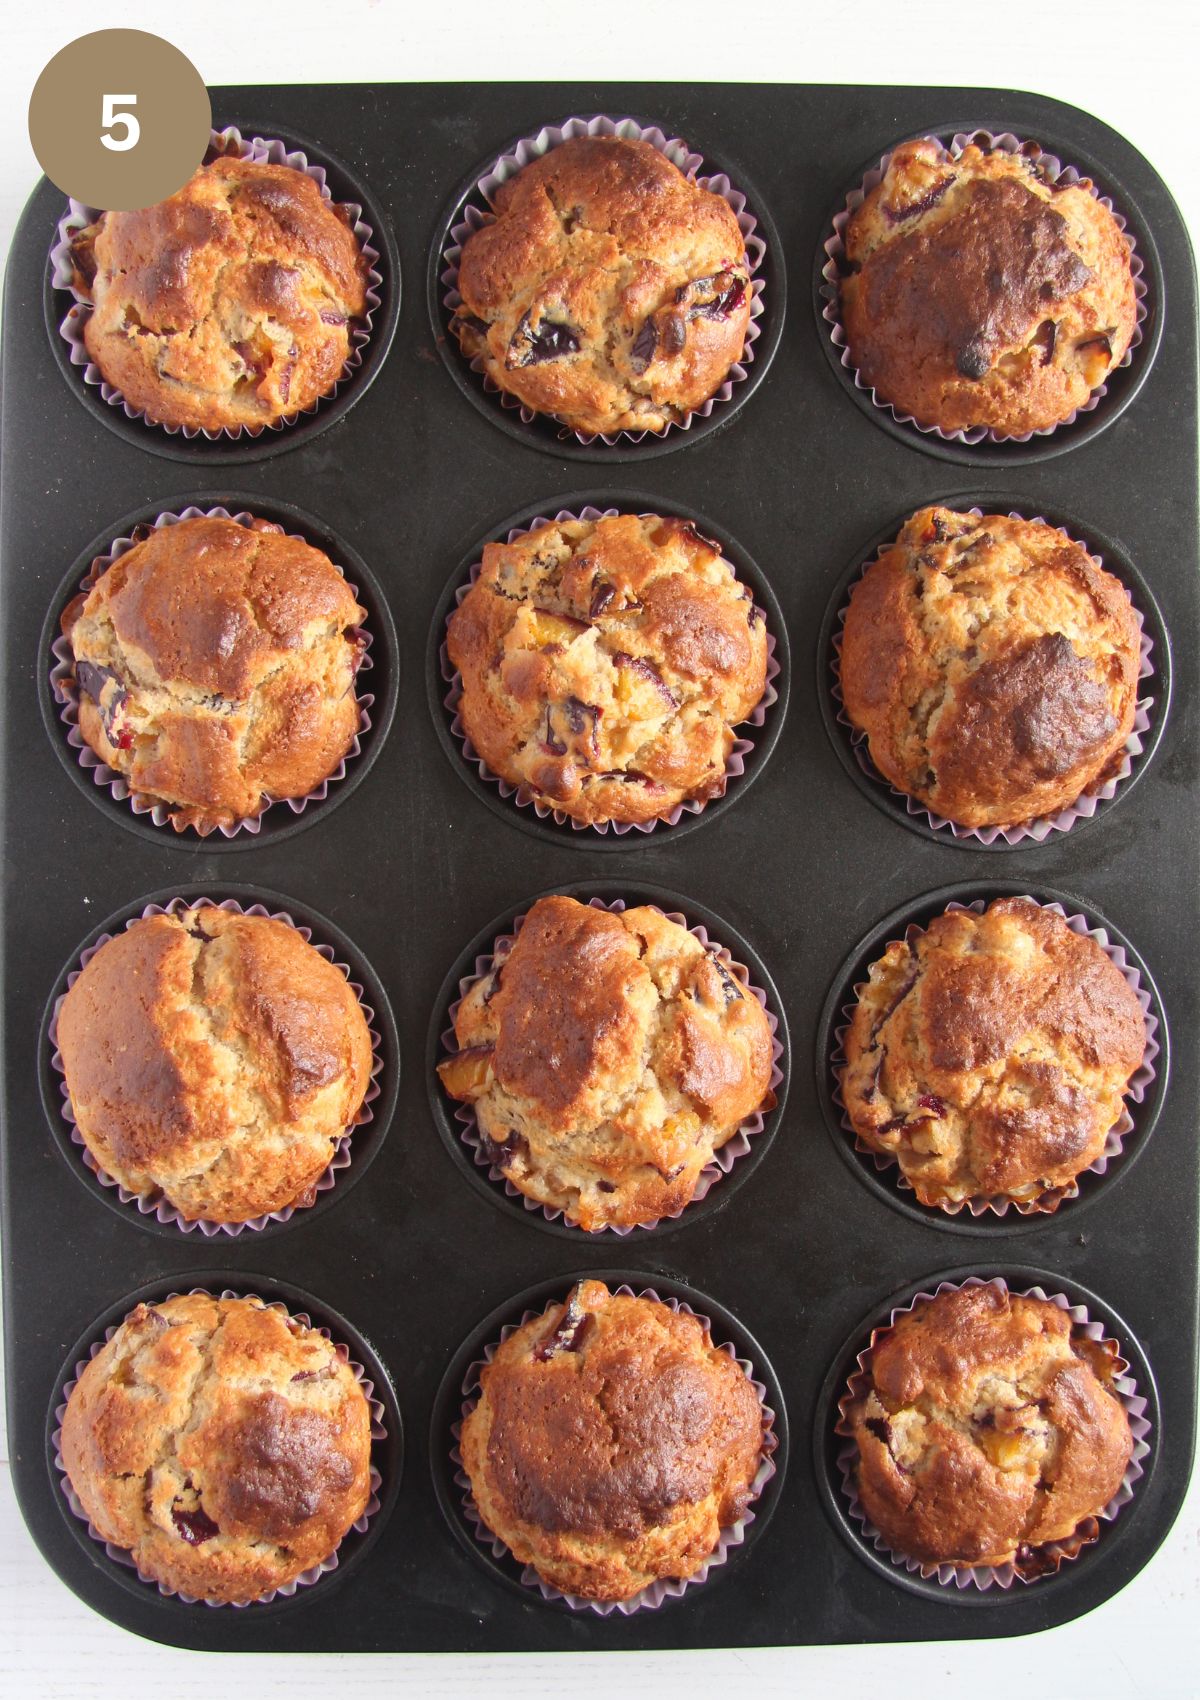 12 golden brown muffins in a baking tray.